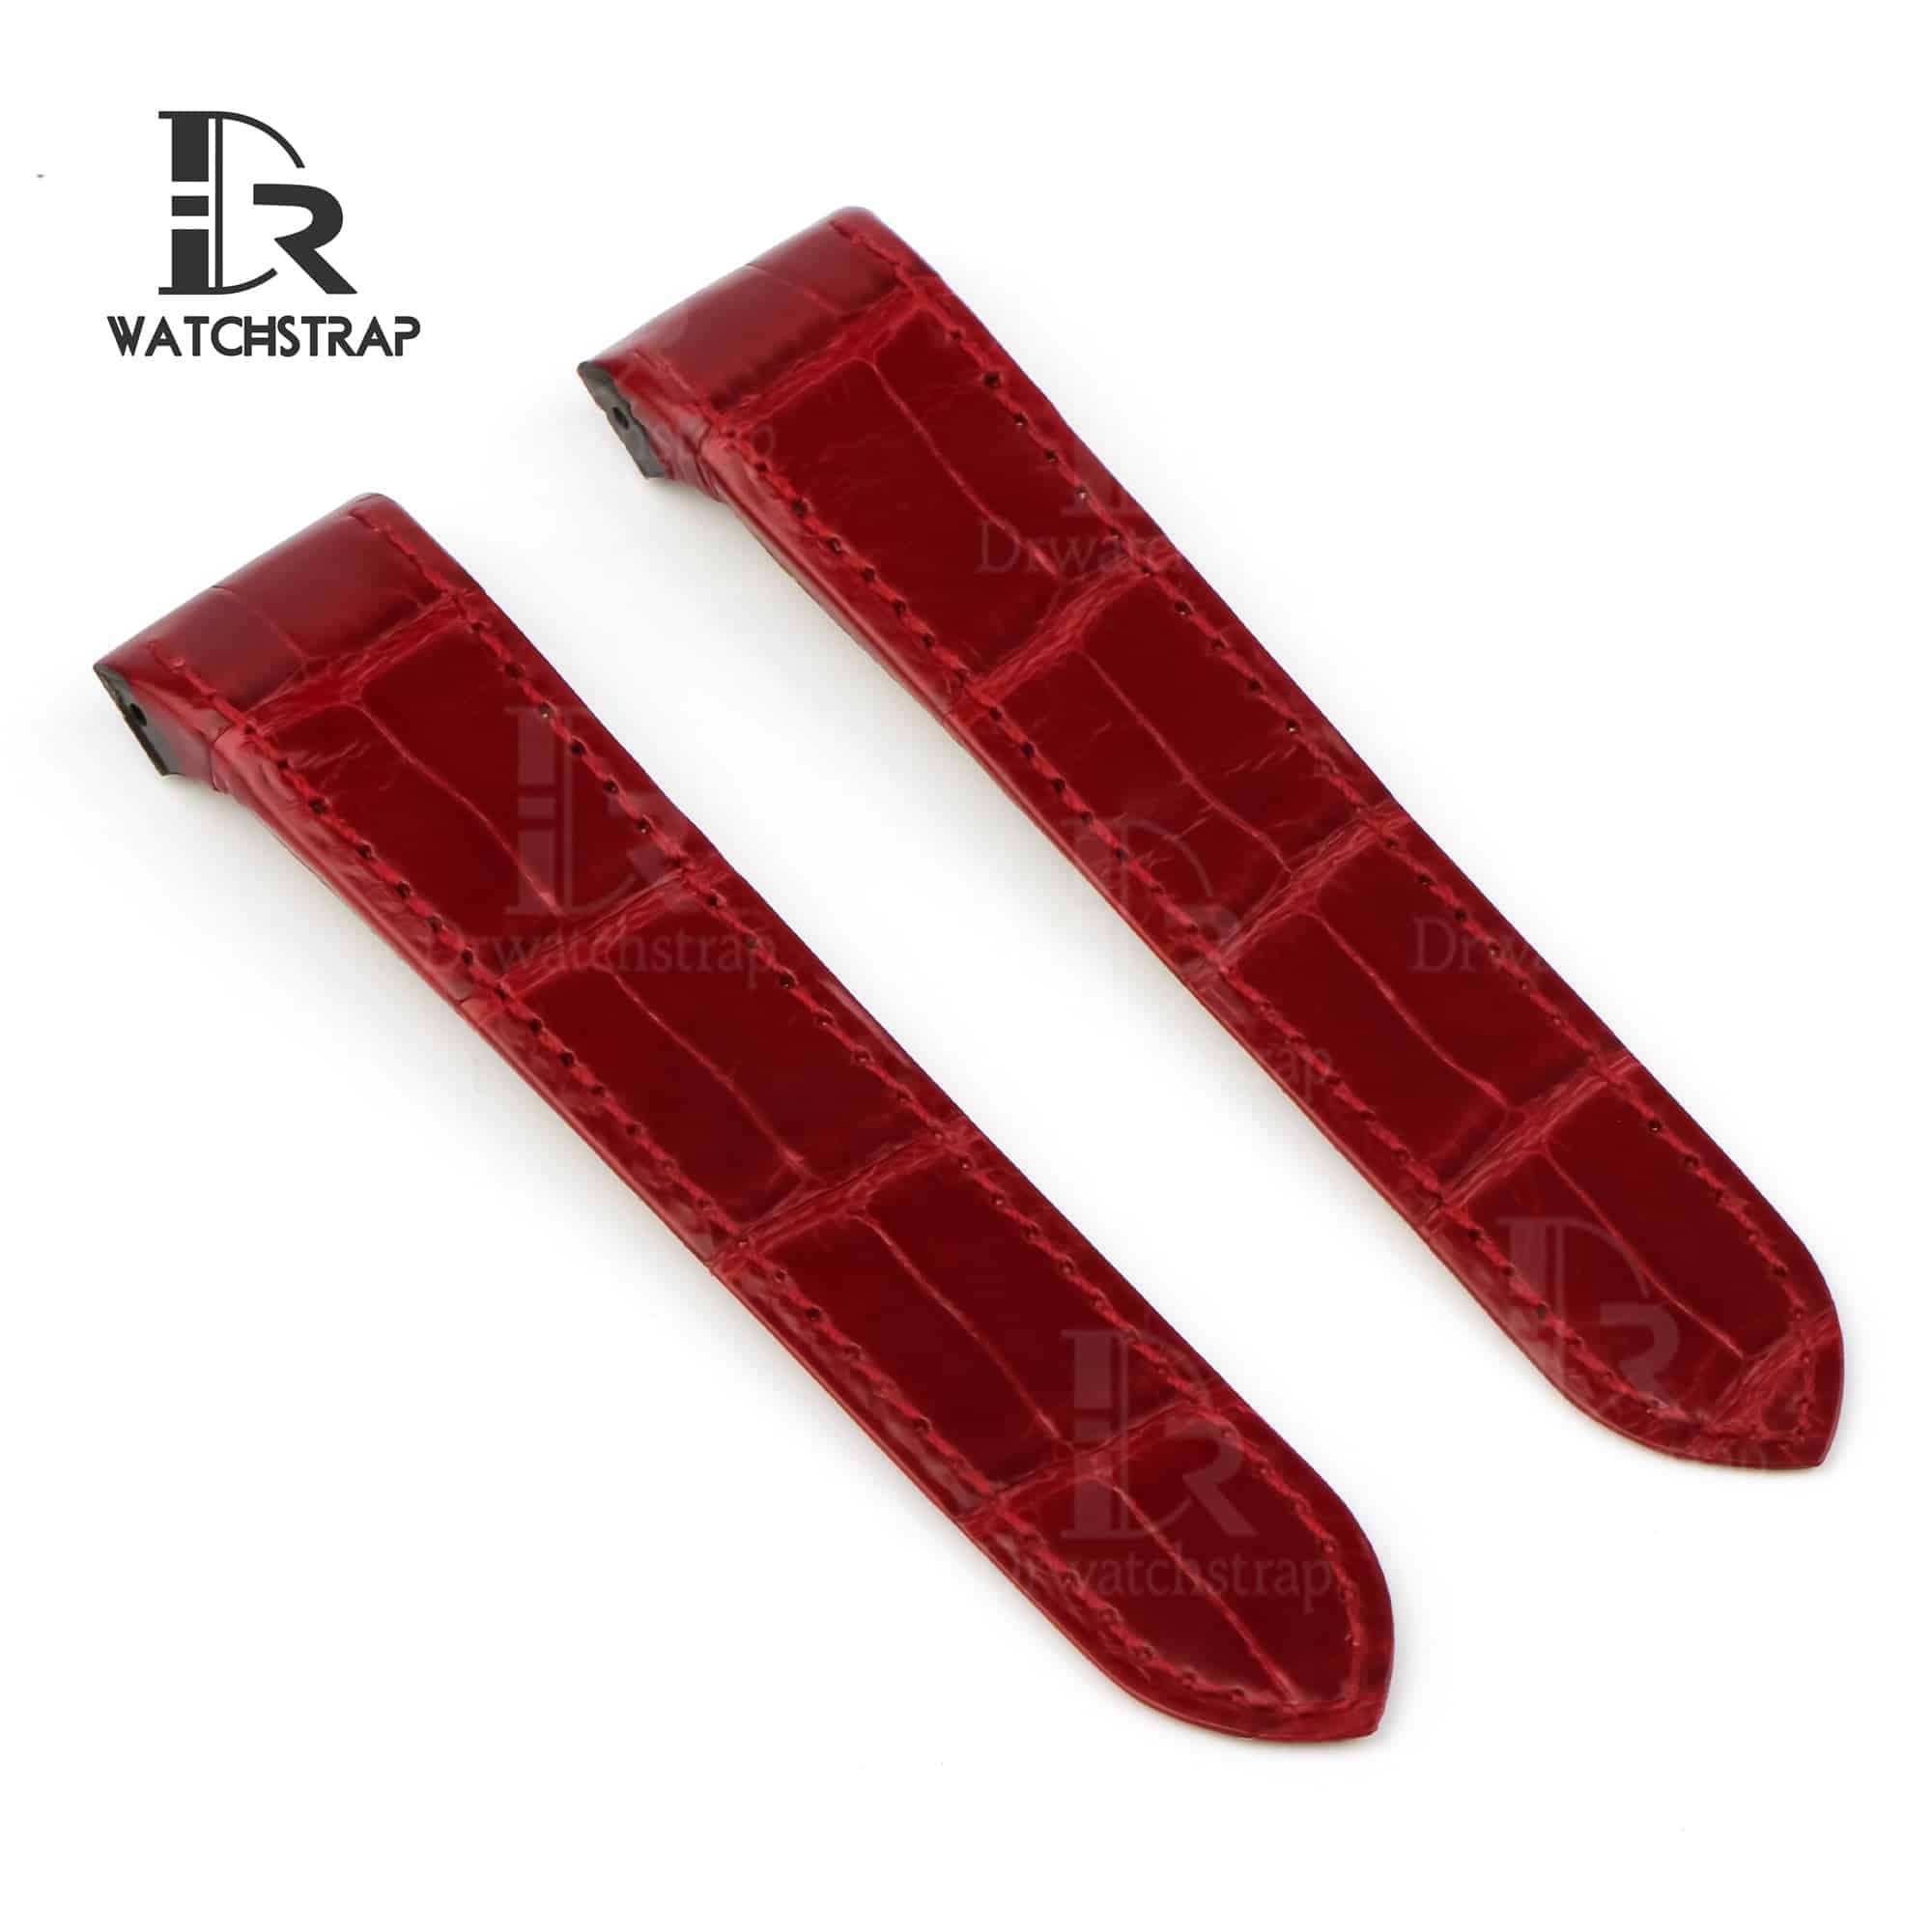 Custom handmade best quality replacement Red America Alligator crocodile leather Cartier Santos 100 watch straps and watch bands for Cartier Santos 100 Medium Large Chronograph XL size watches - OEM aftermarket high-end leather watchbandx and strap online at a low price